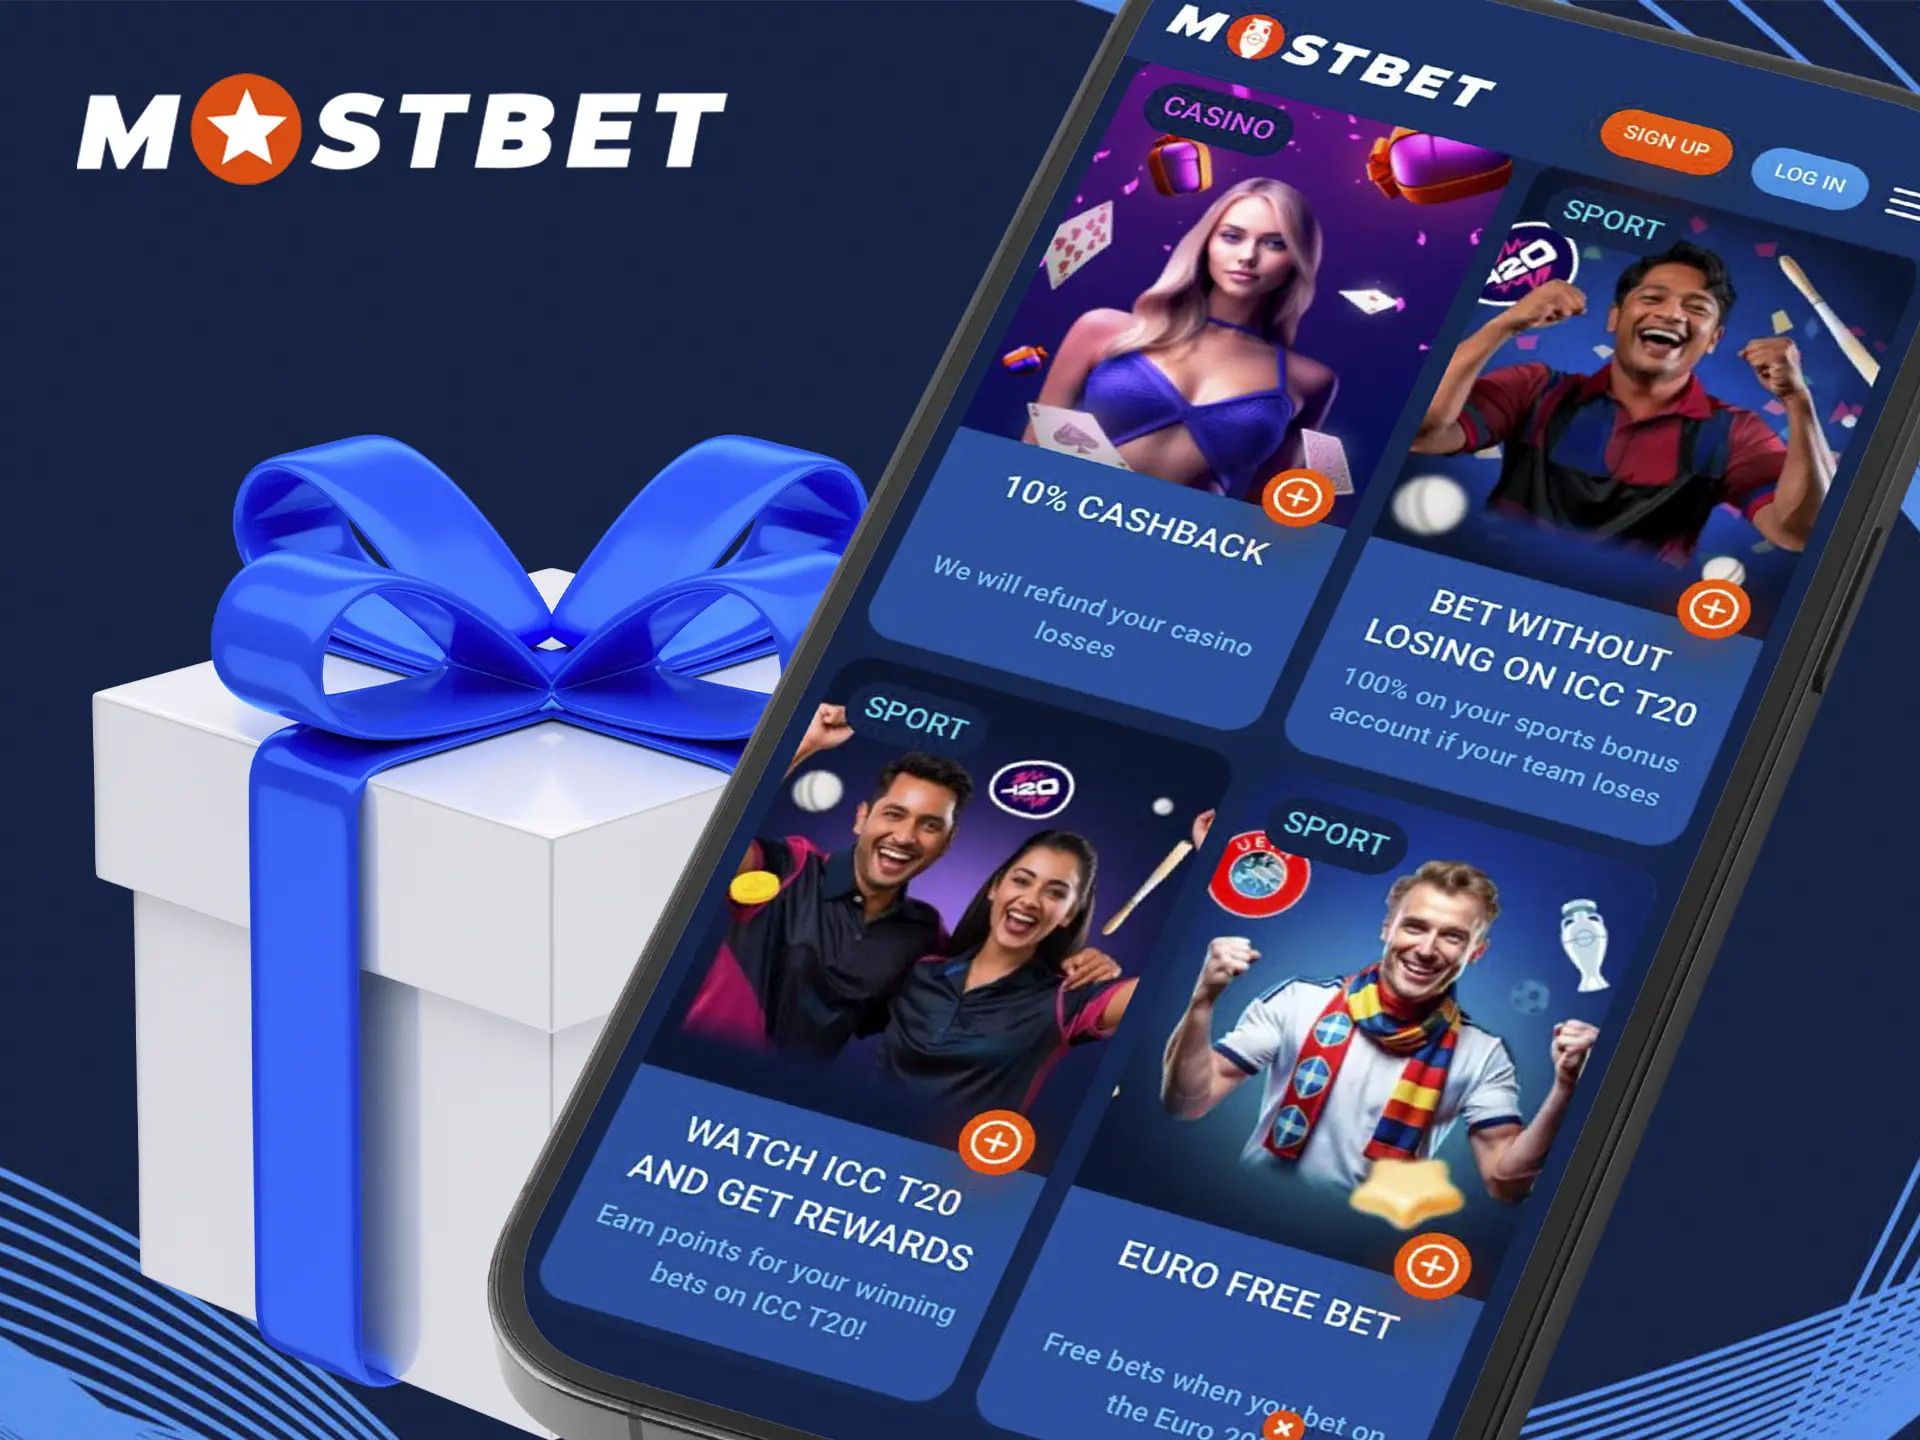 Don't forget about the bonuses from Mostbet, which will significantly increase your profits.